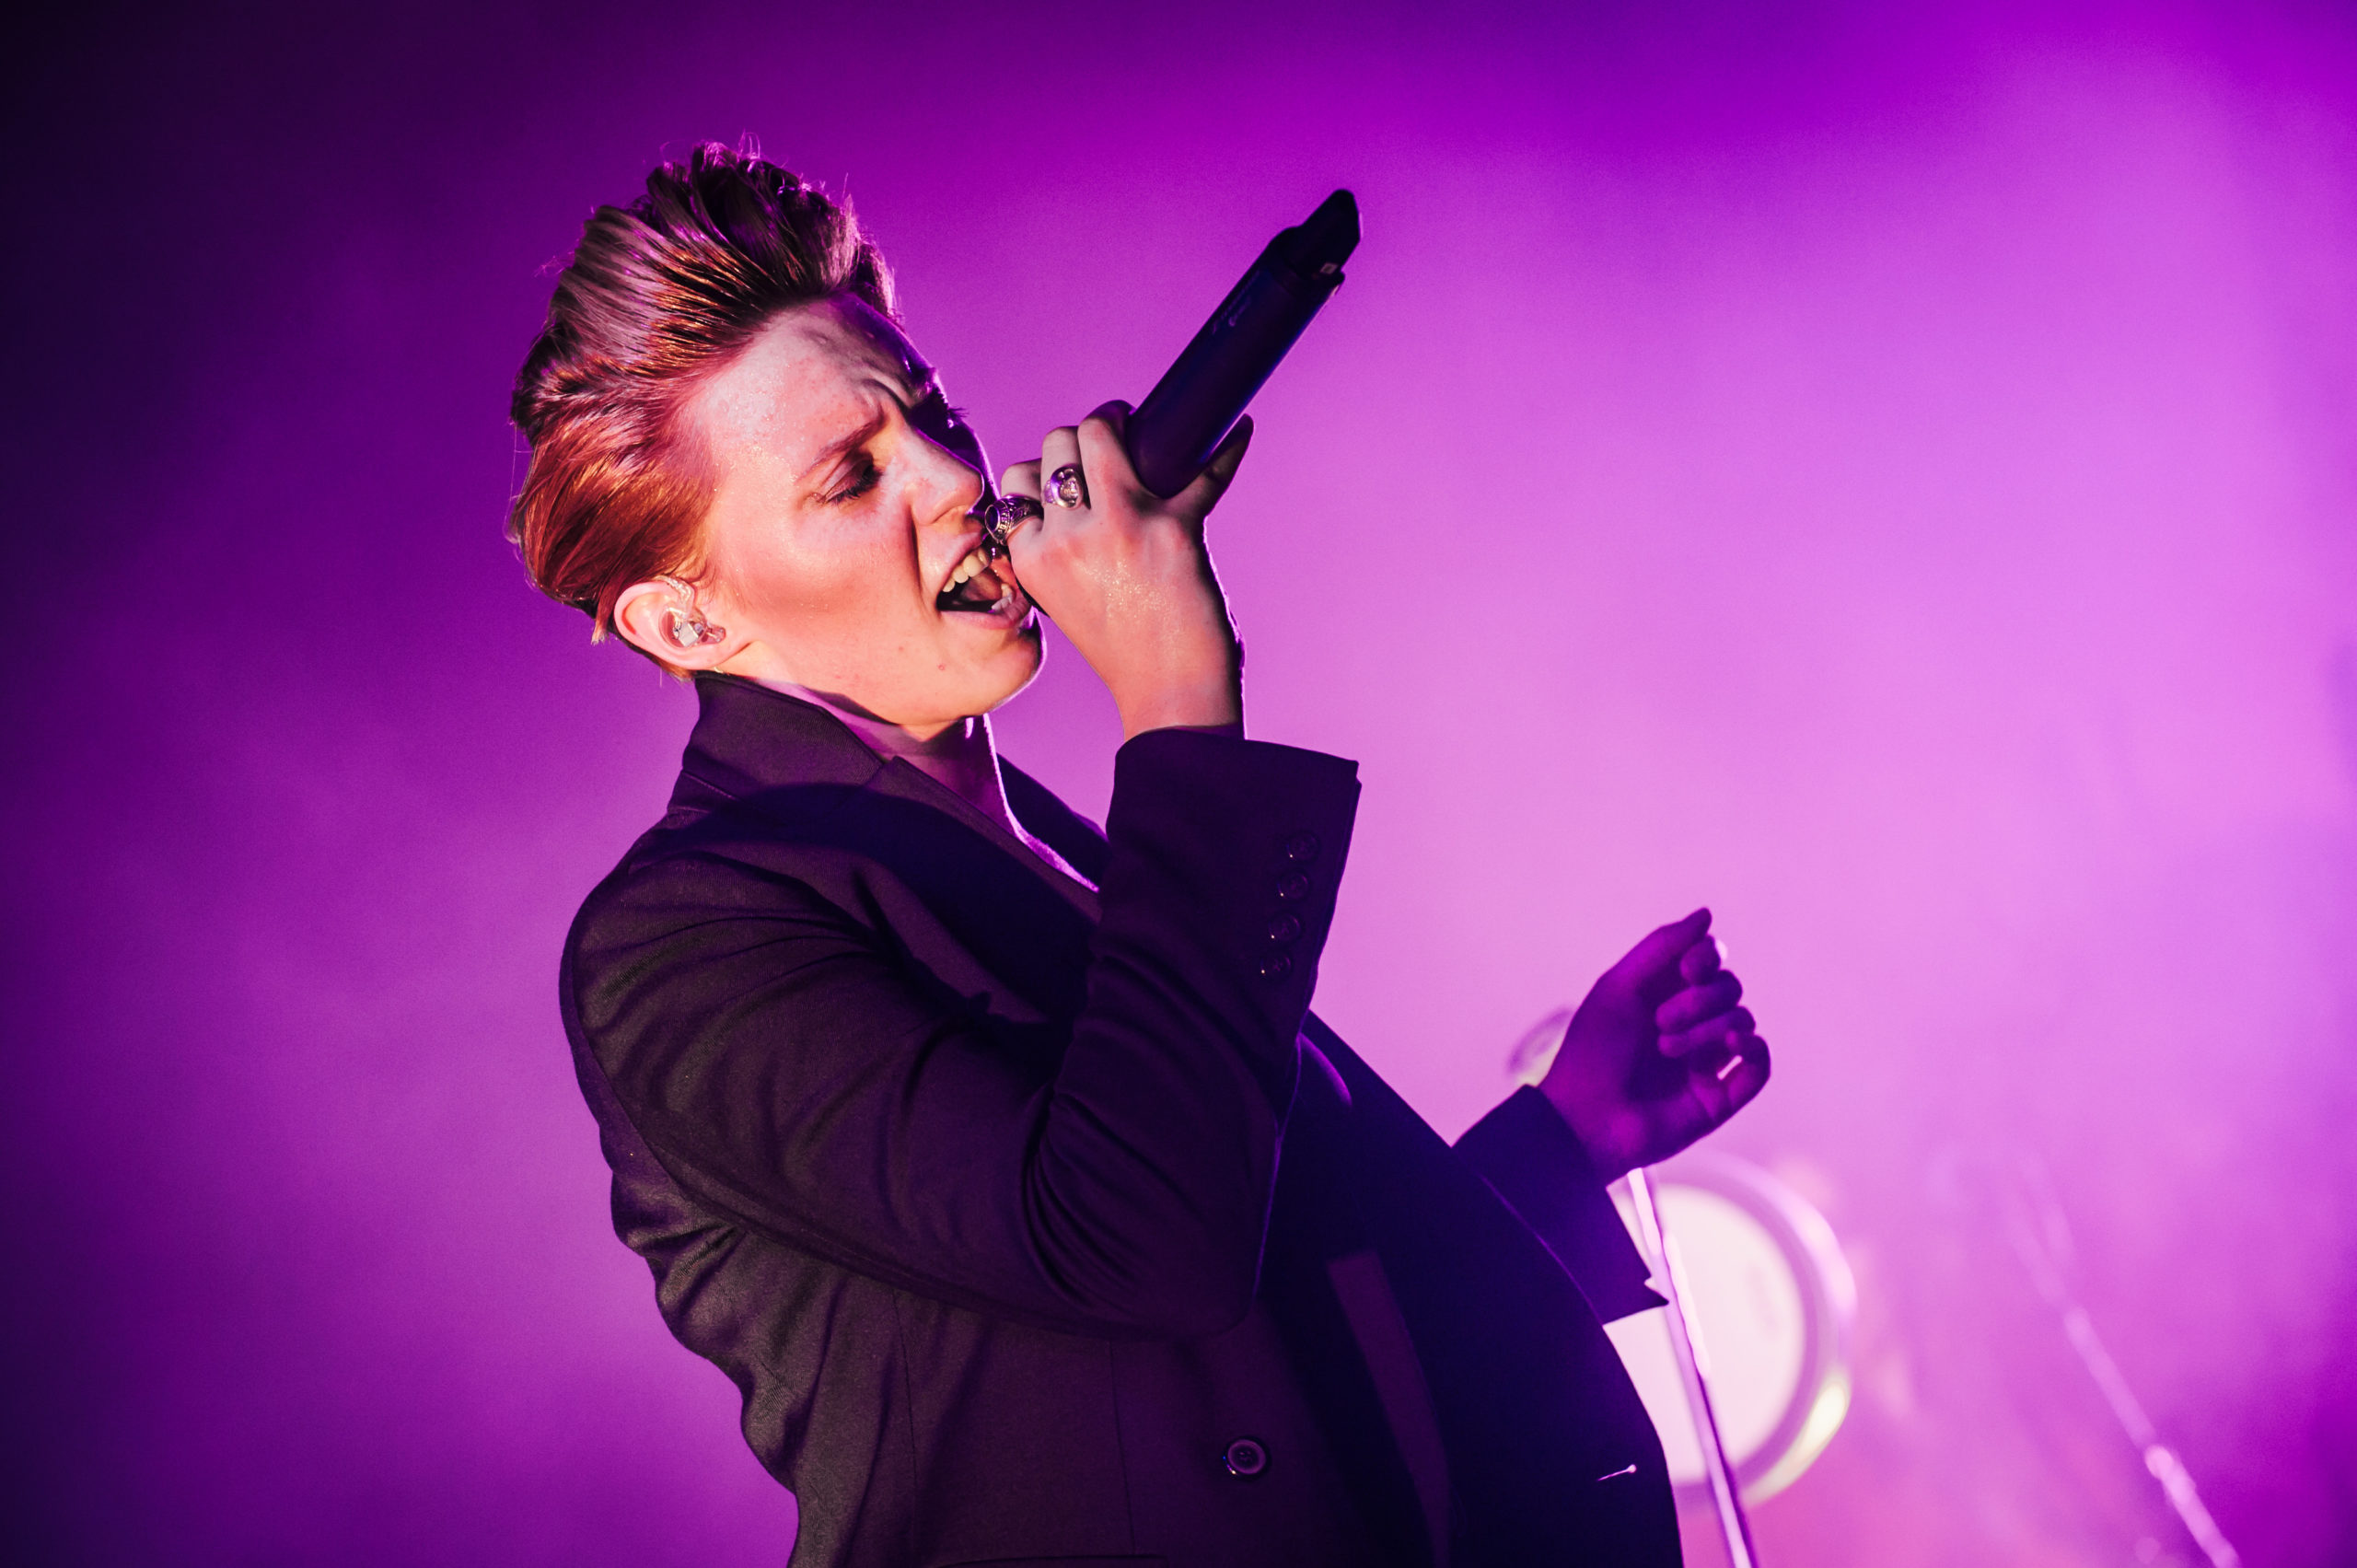 Singer Elly Jackson of La Roux performs live on stage during Melt! Festival in 2015 